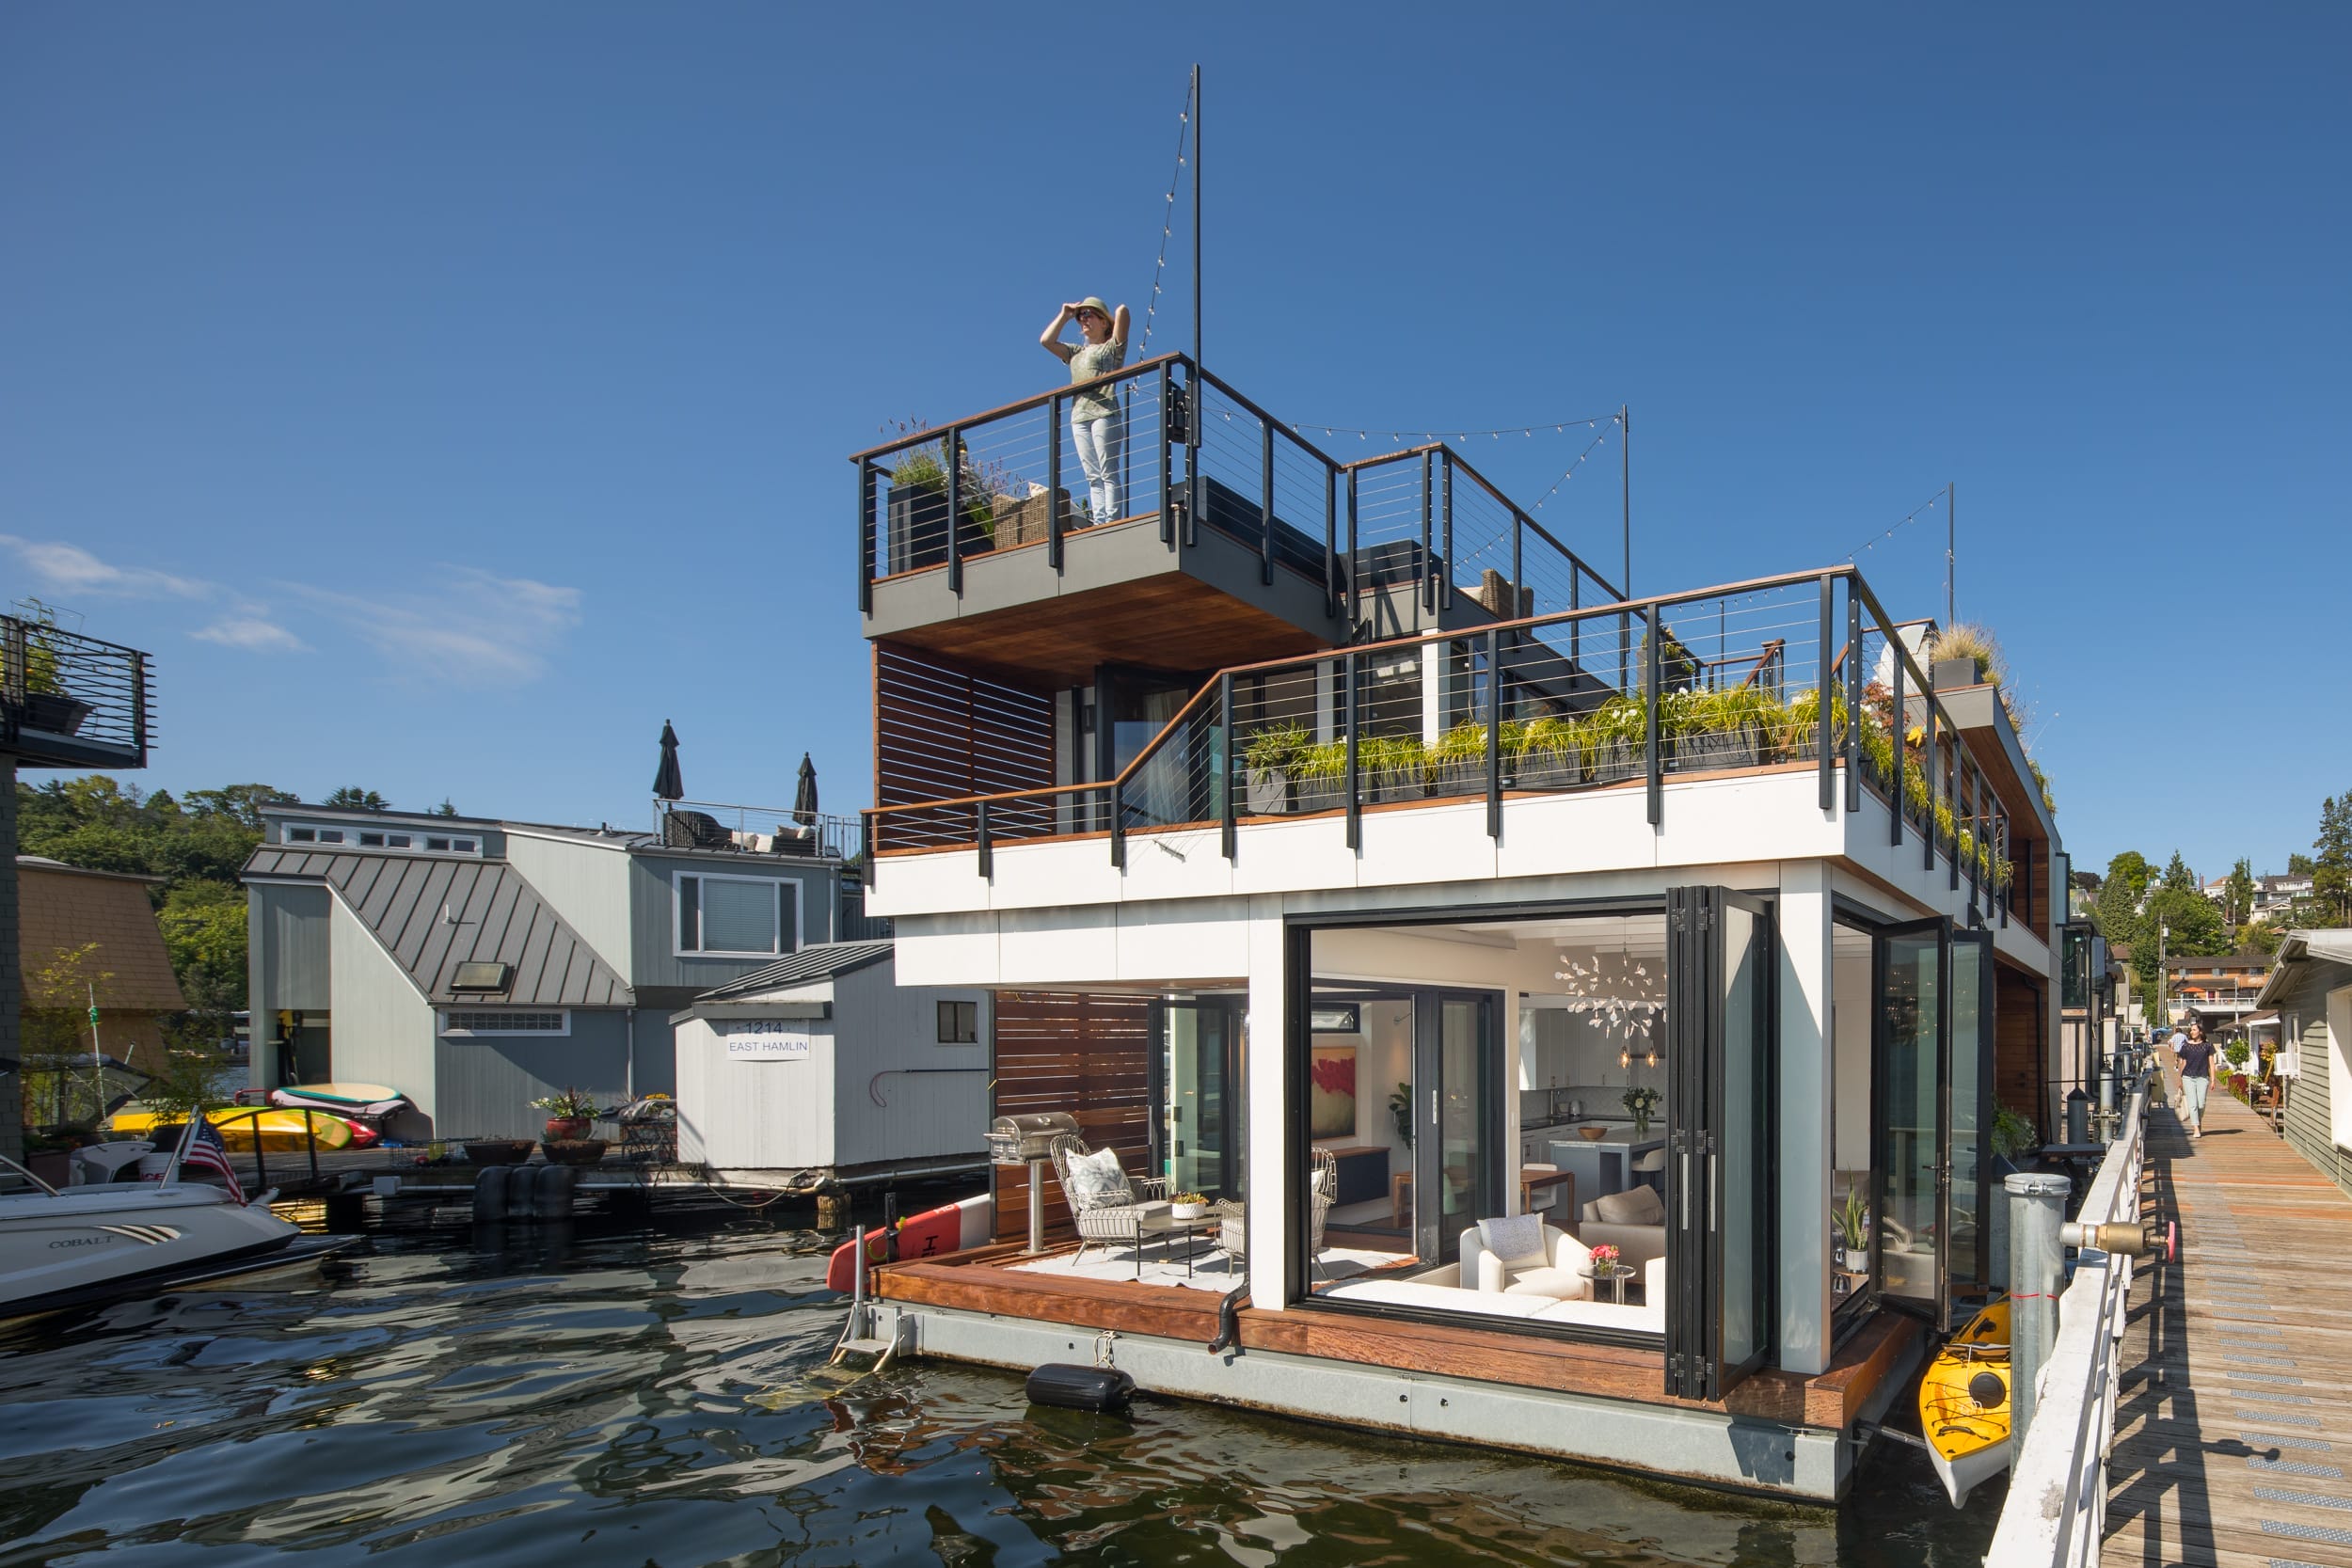 A carpenter-made modern houseboat is docked in a body of water.